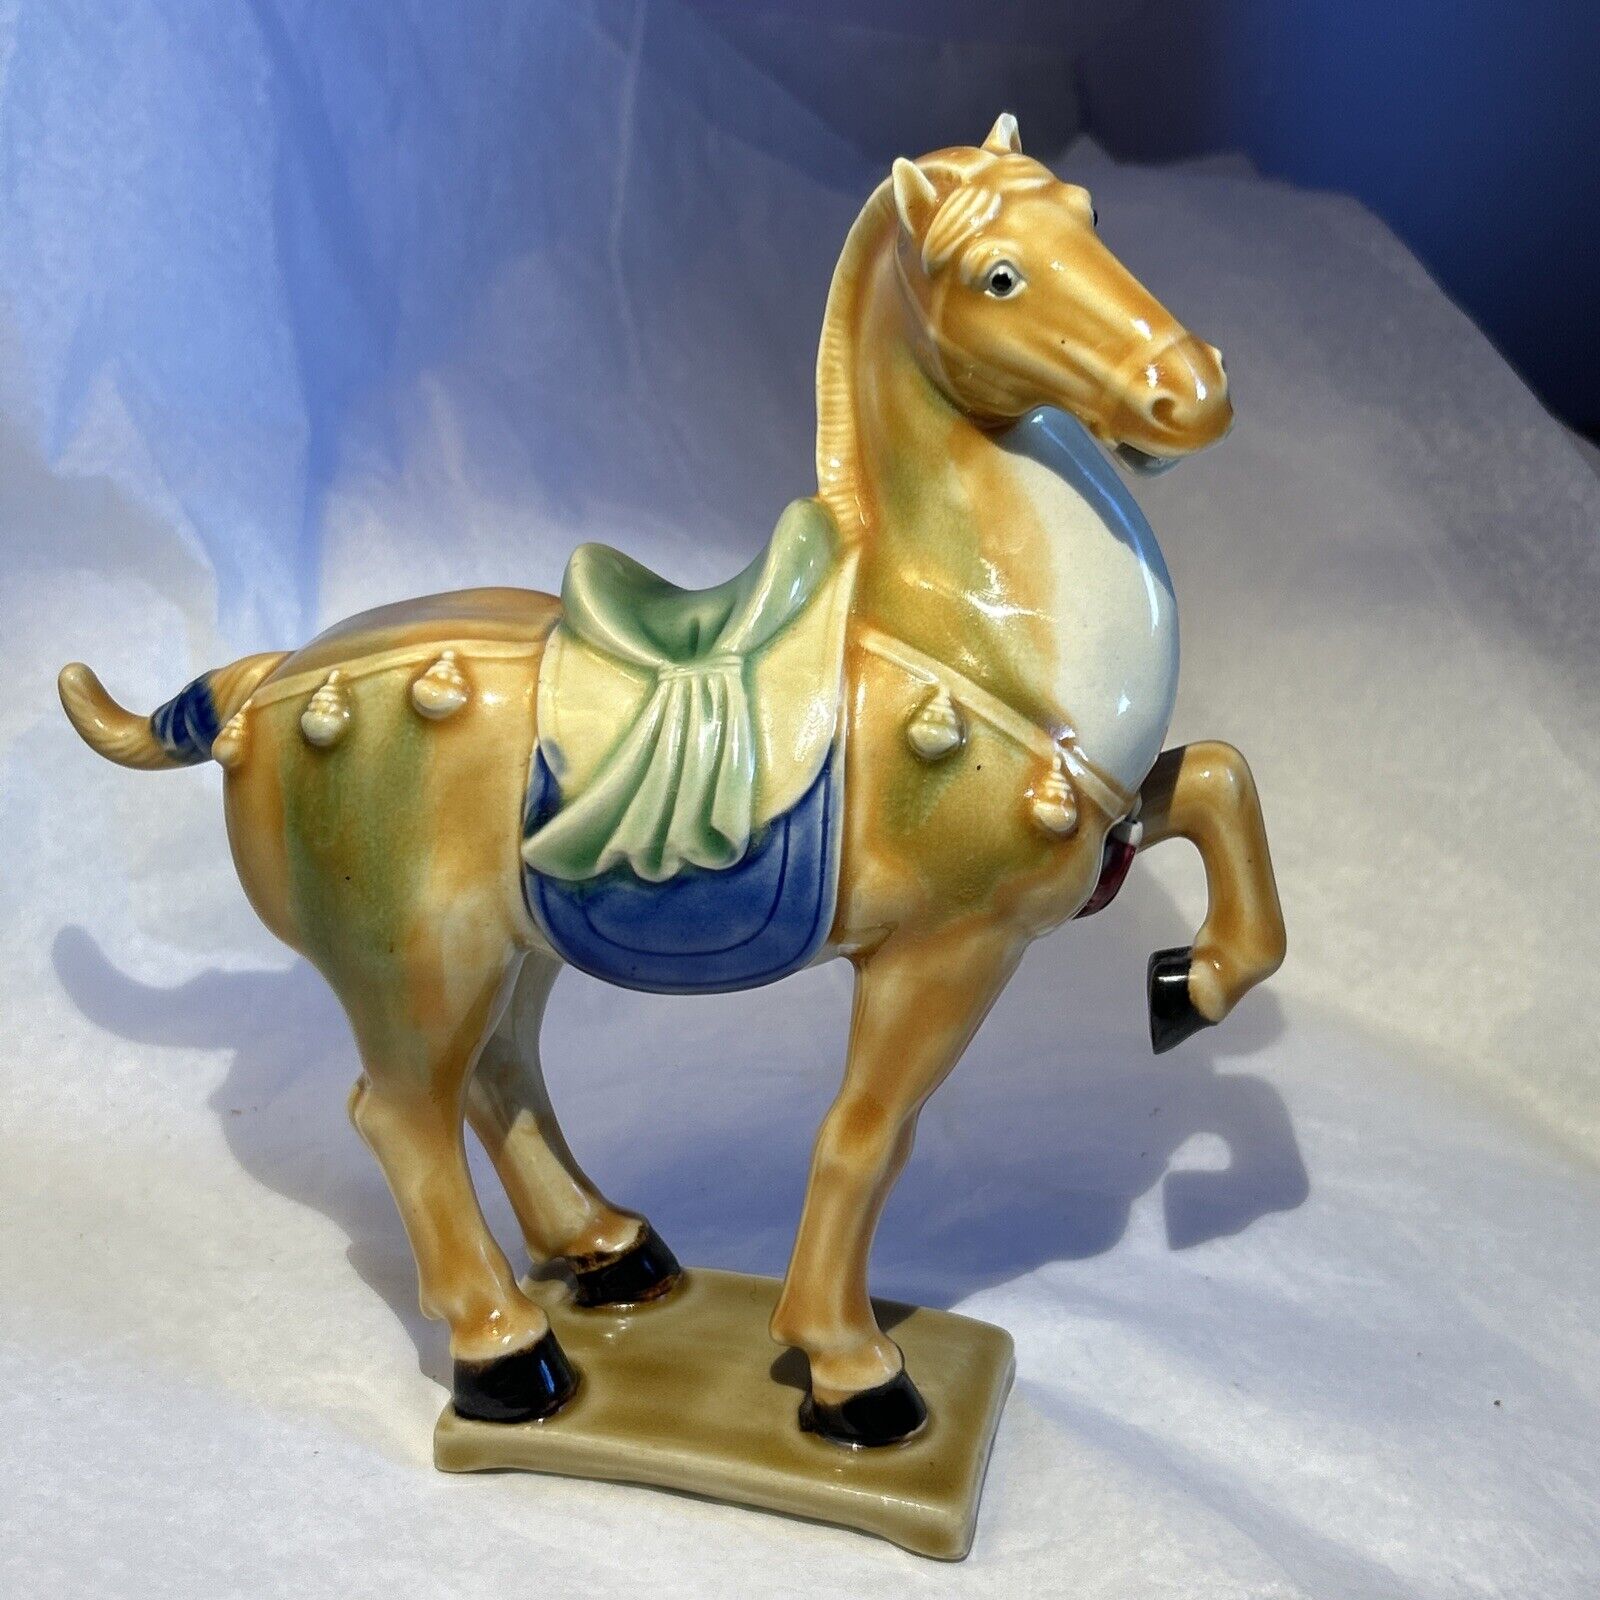 Vintage Chinese Tang Style Glazed Ceramic Prancing War Horse Pottery Statue 1970